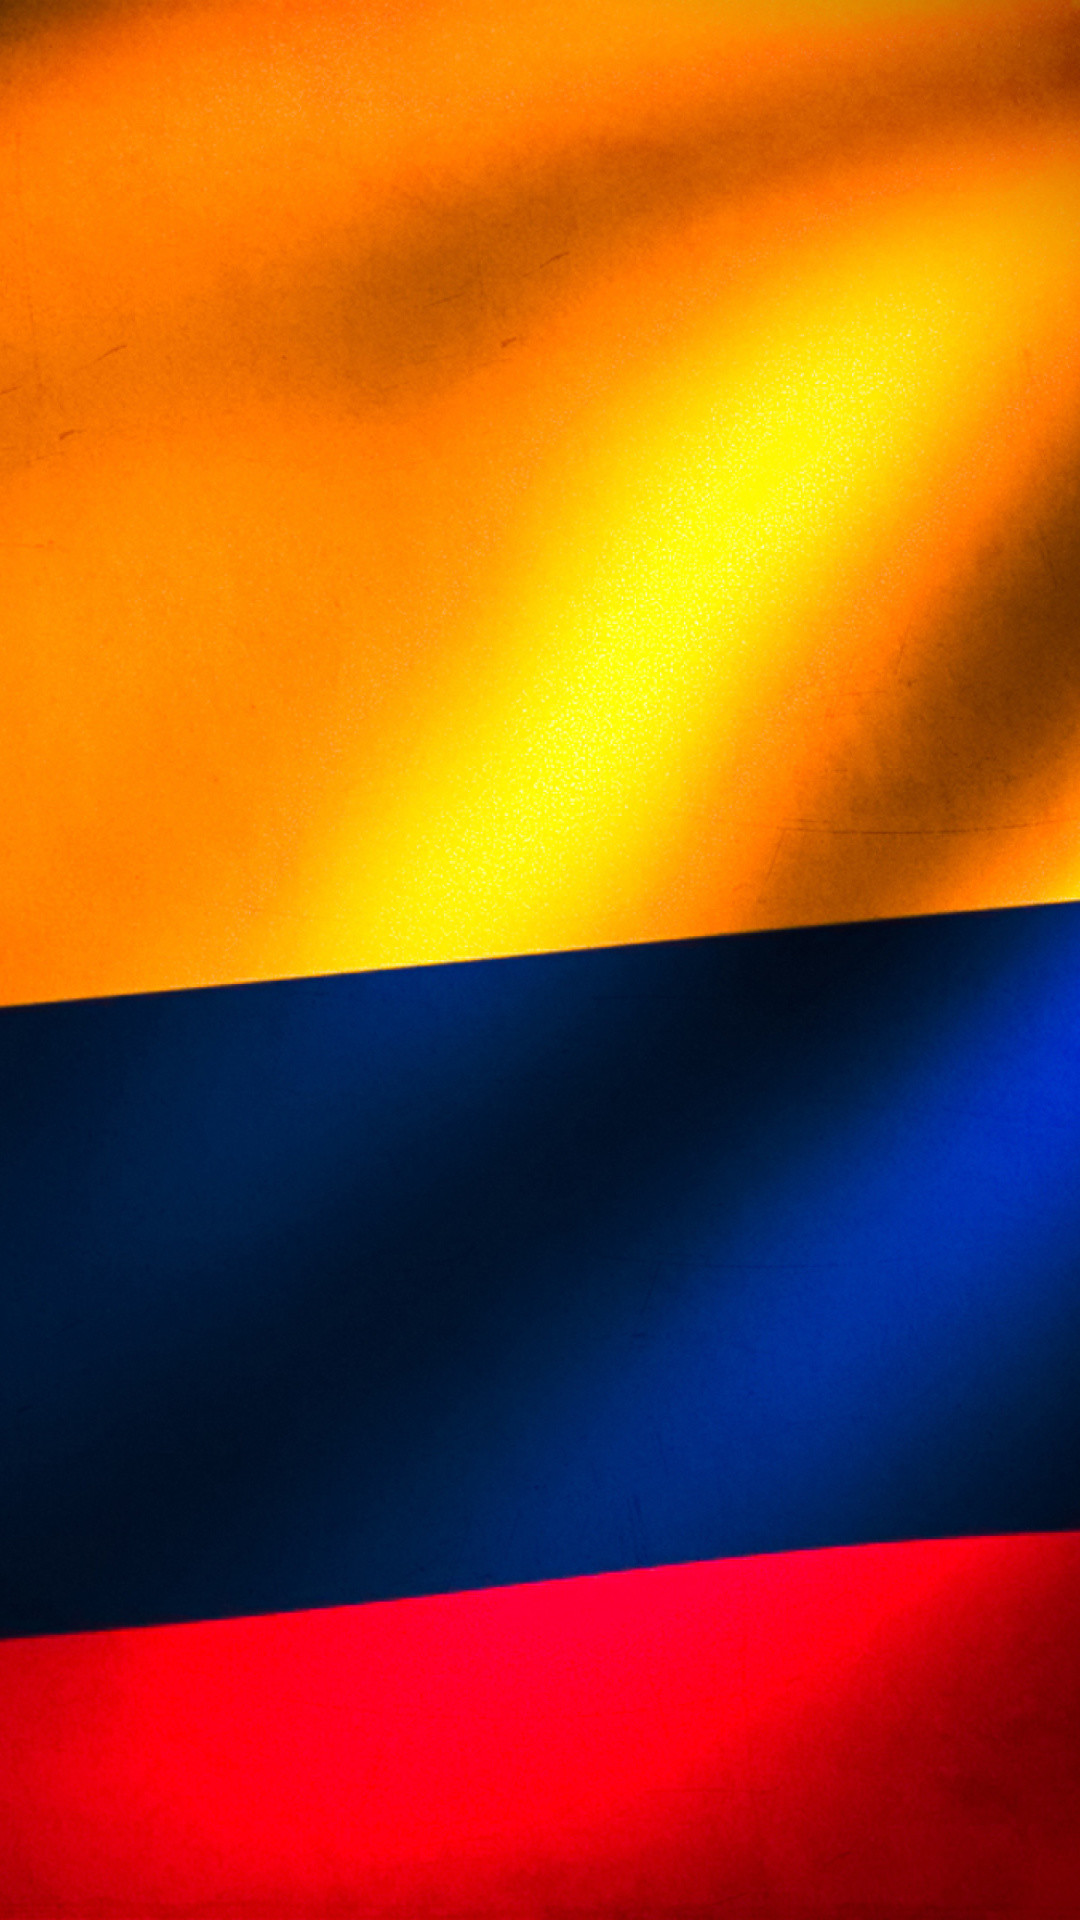 1080x1920 Colombia flag iphone 6 hd photos